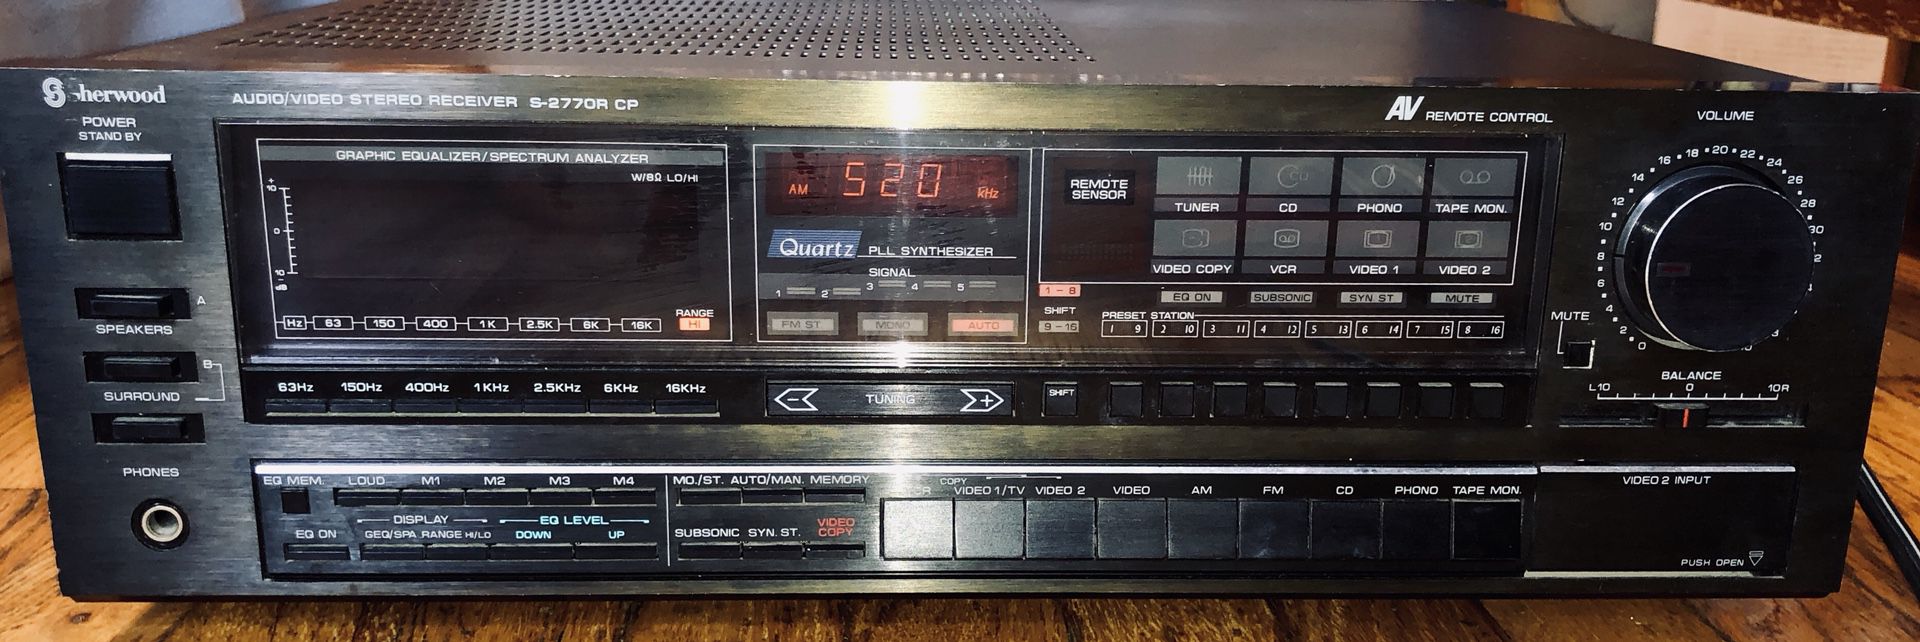 Sherwood Model S-277ORCP Audio/Video stereo receiver